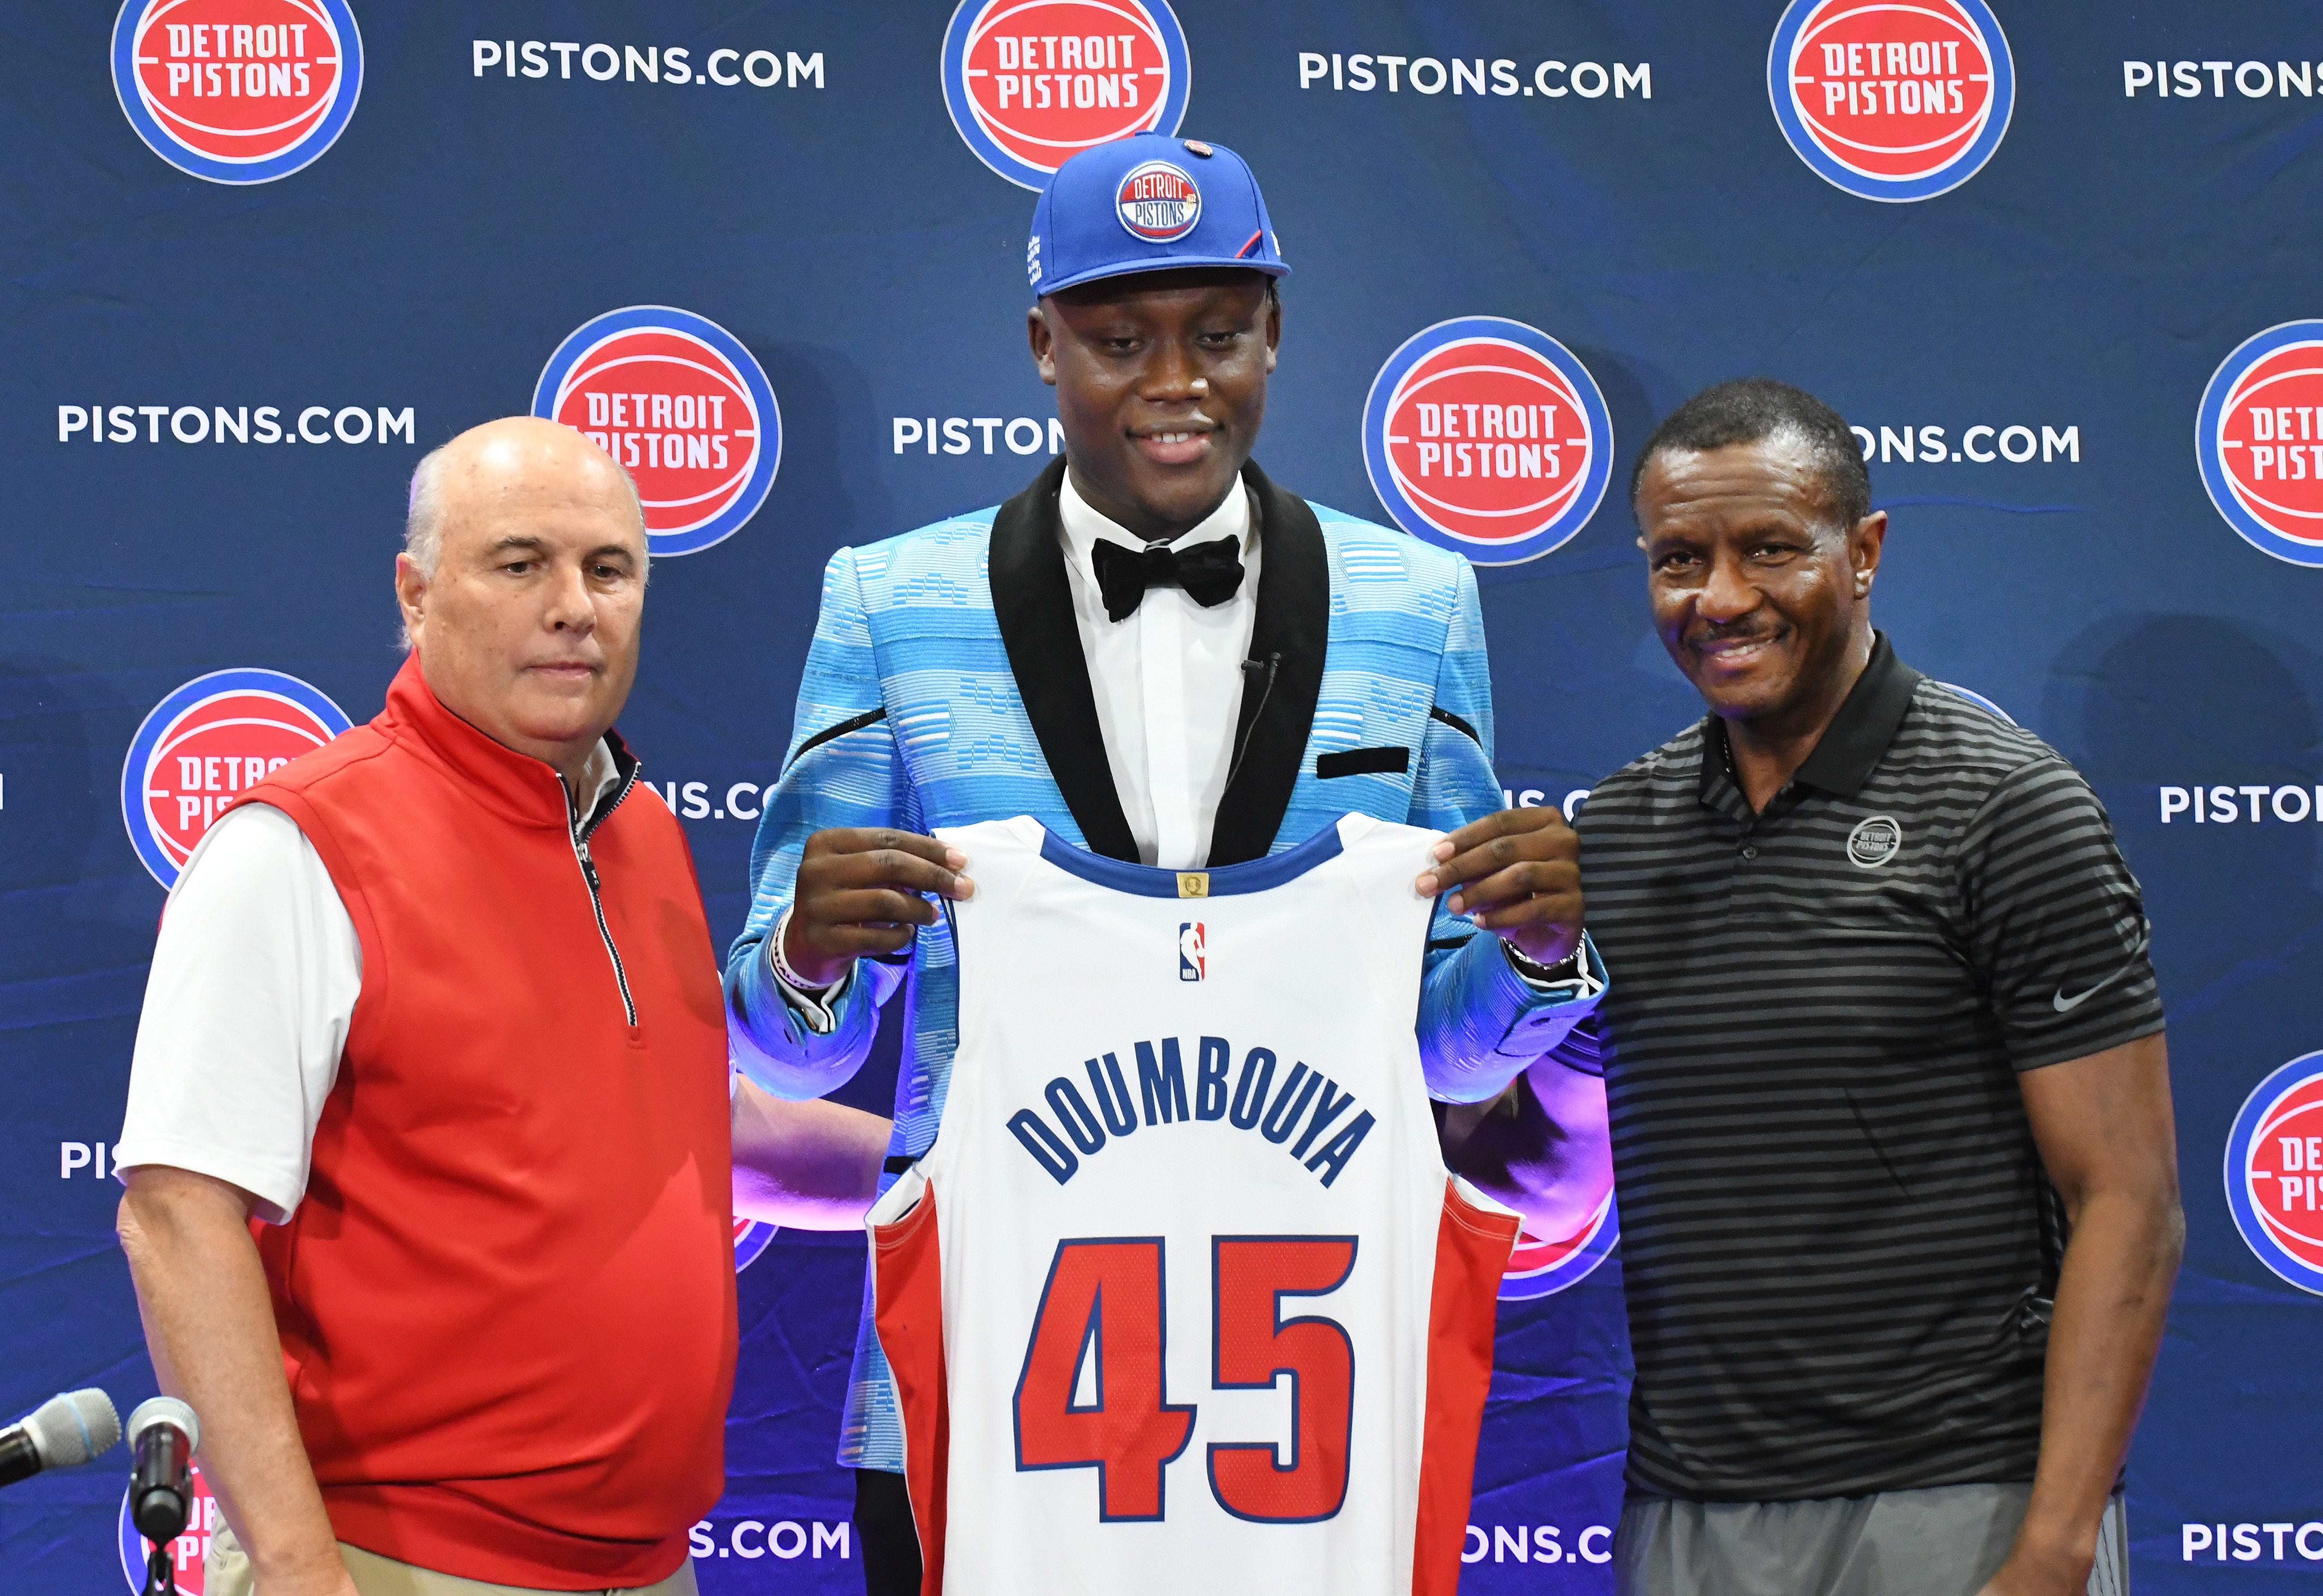 Detroit Pistons senior advisor to owner Tom Gores Ed Stefanski, Pistons first round pick Sekou Doumbouya and Pistons head coach Dwane Casey pose for a photo during the press conference at the practice facility.